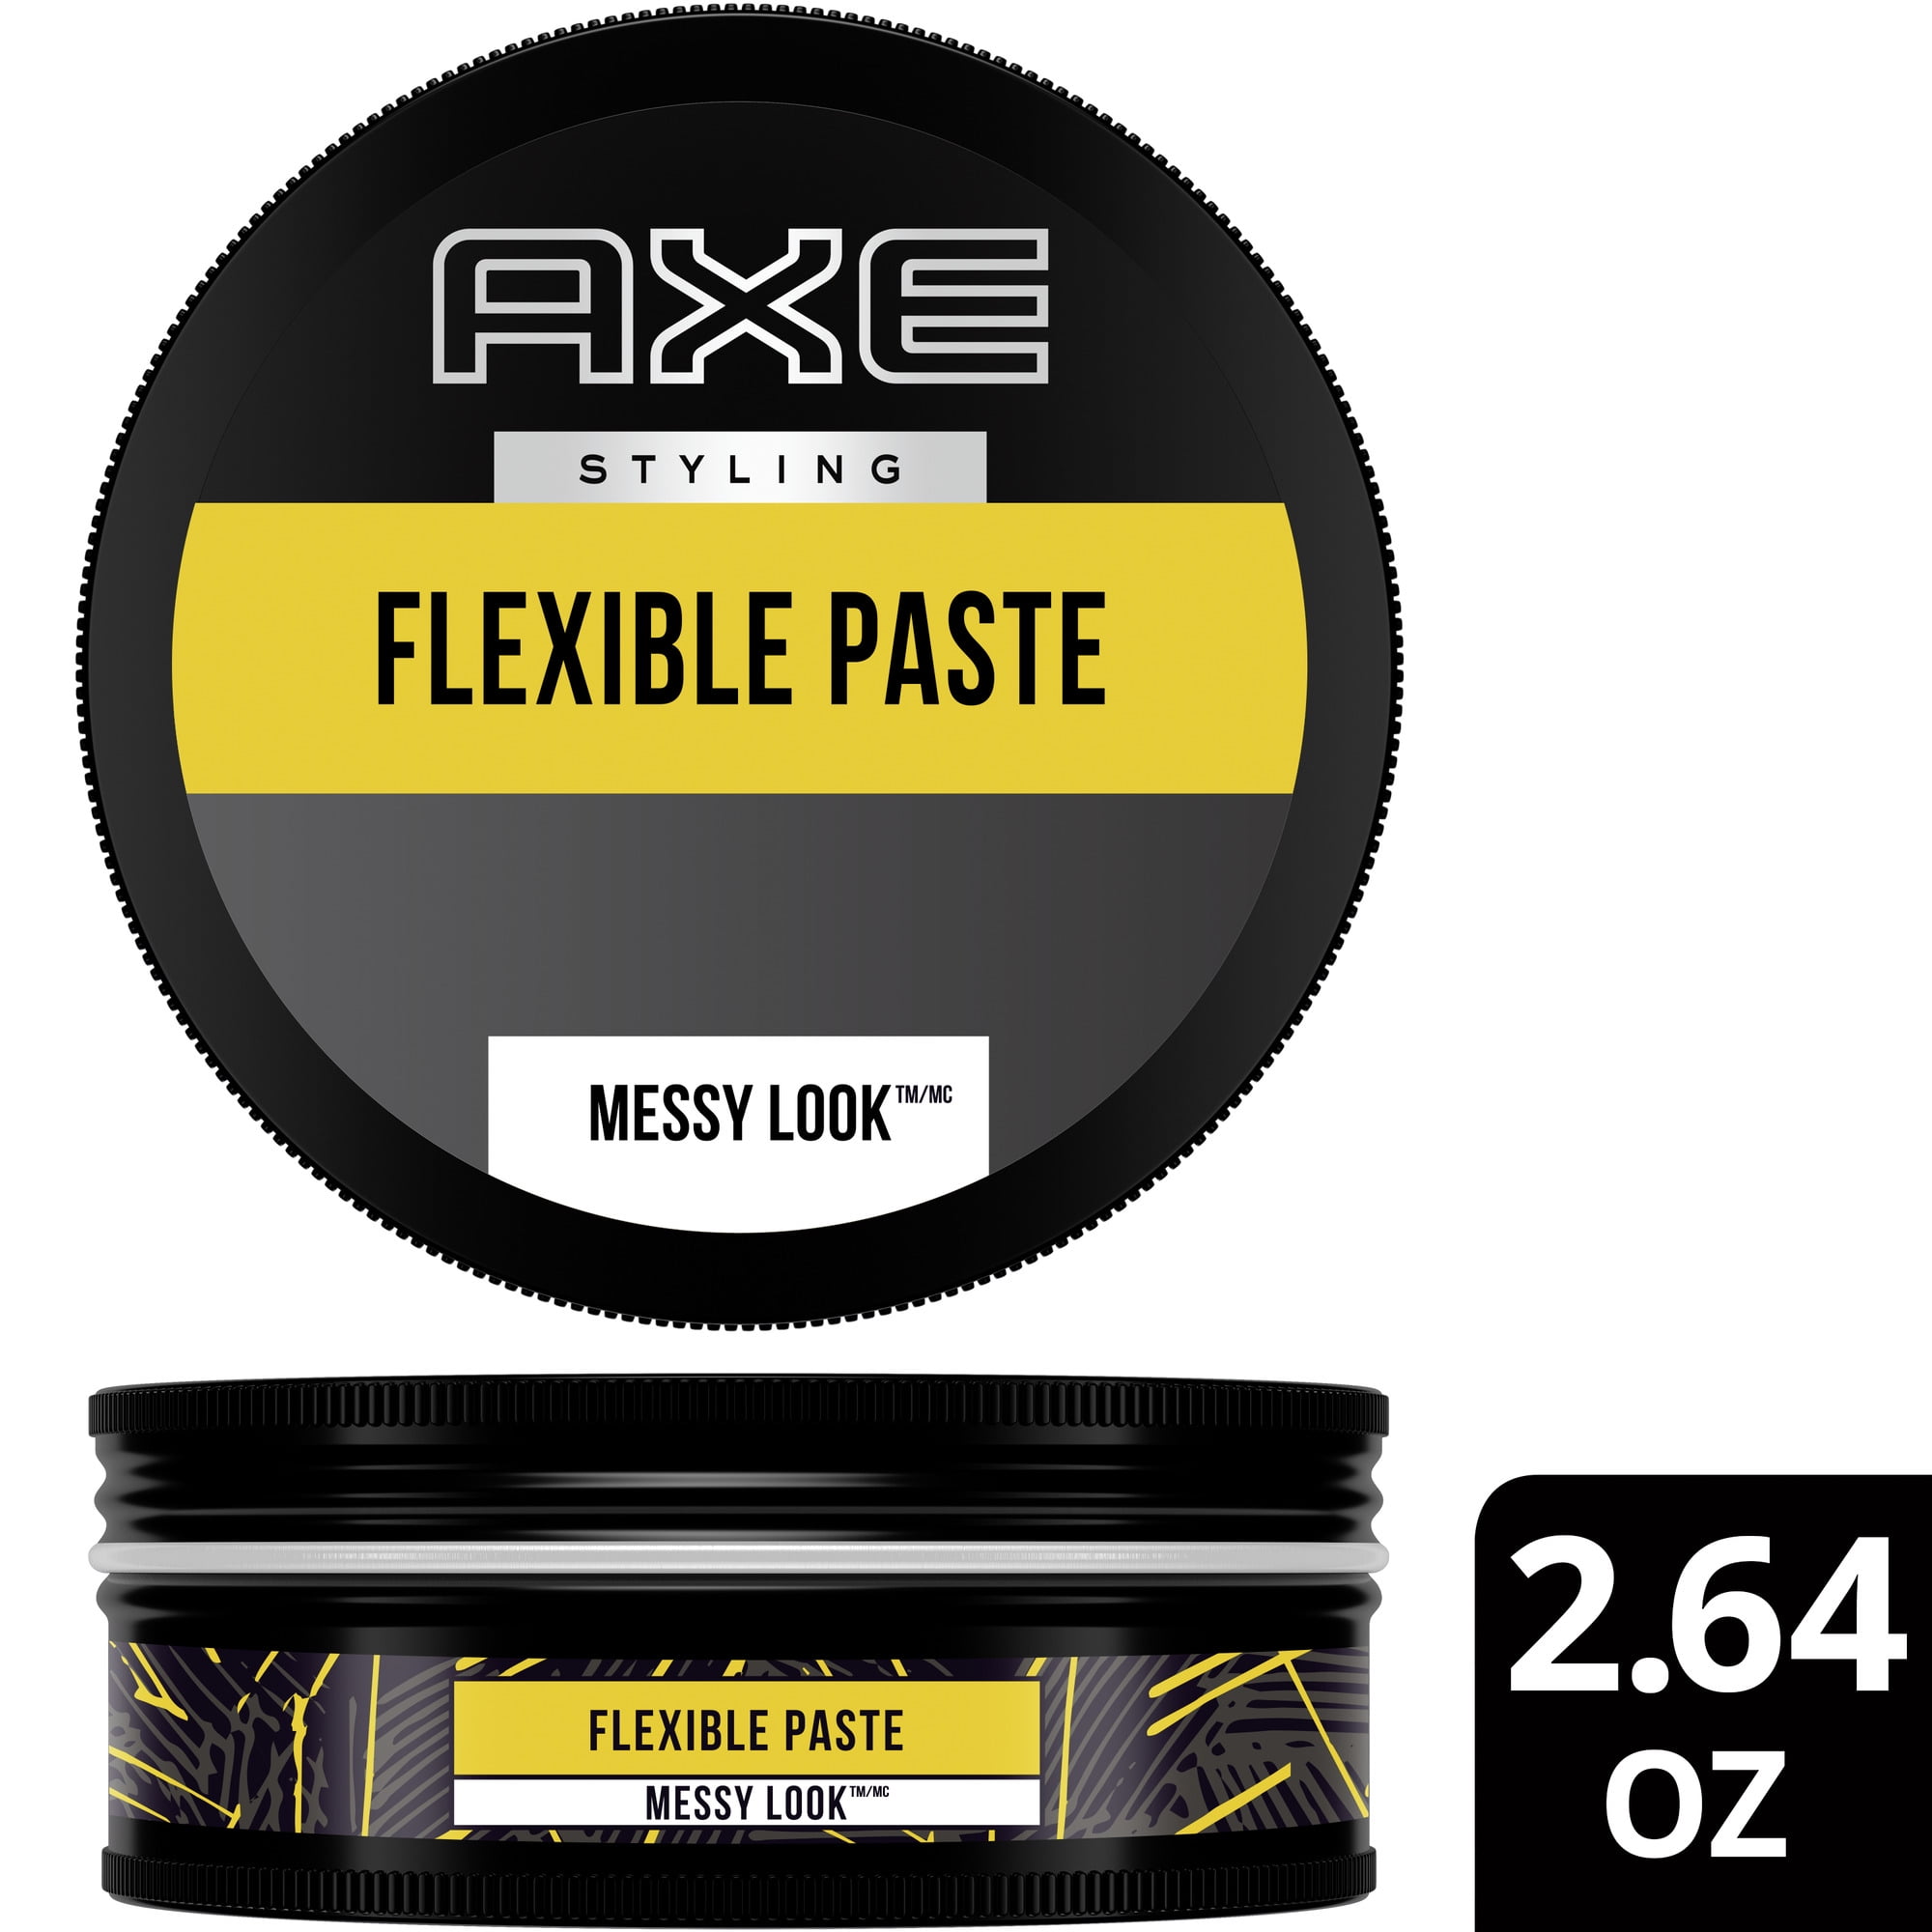 AXE Texturising Hair Paste Pomade, Messy Look Medium Hold Flexible, Easy to Use Natural Finish for Short to Mid-Length Hair, 2.64 oz